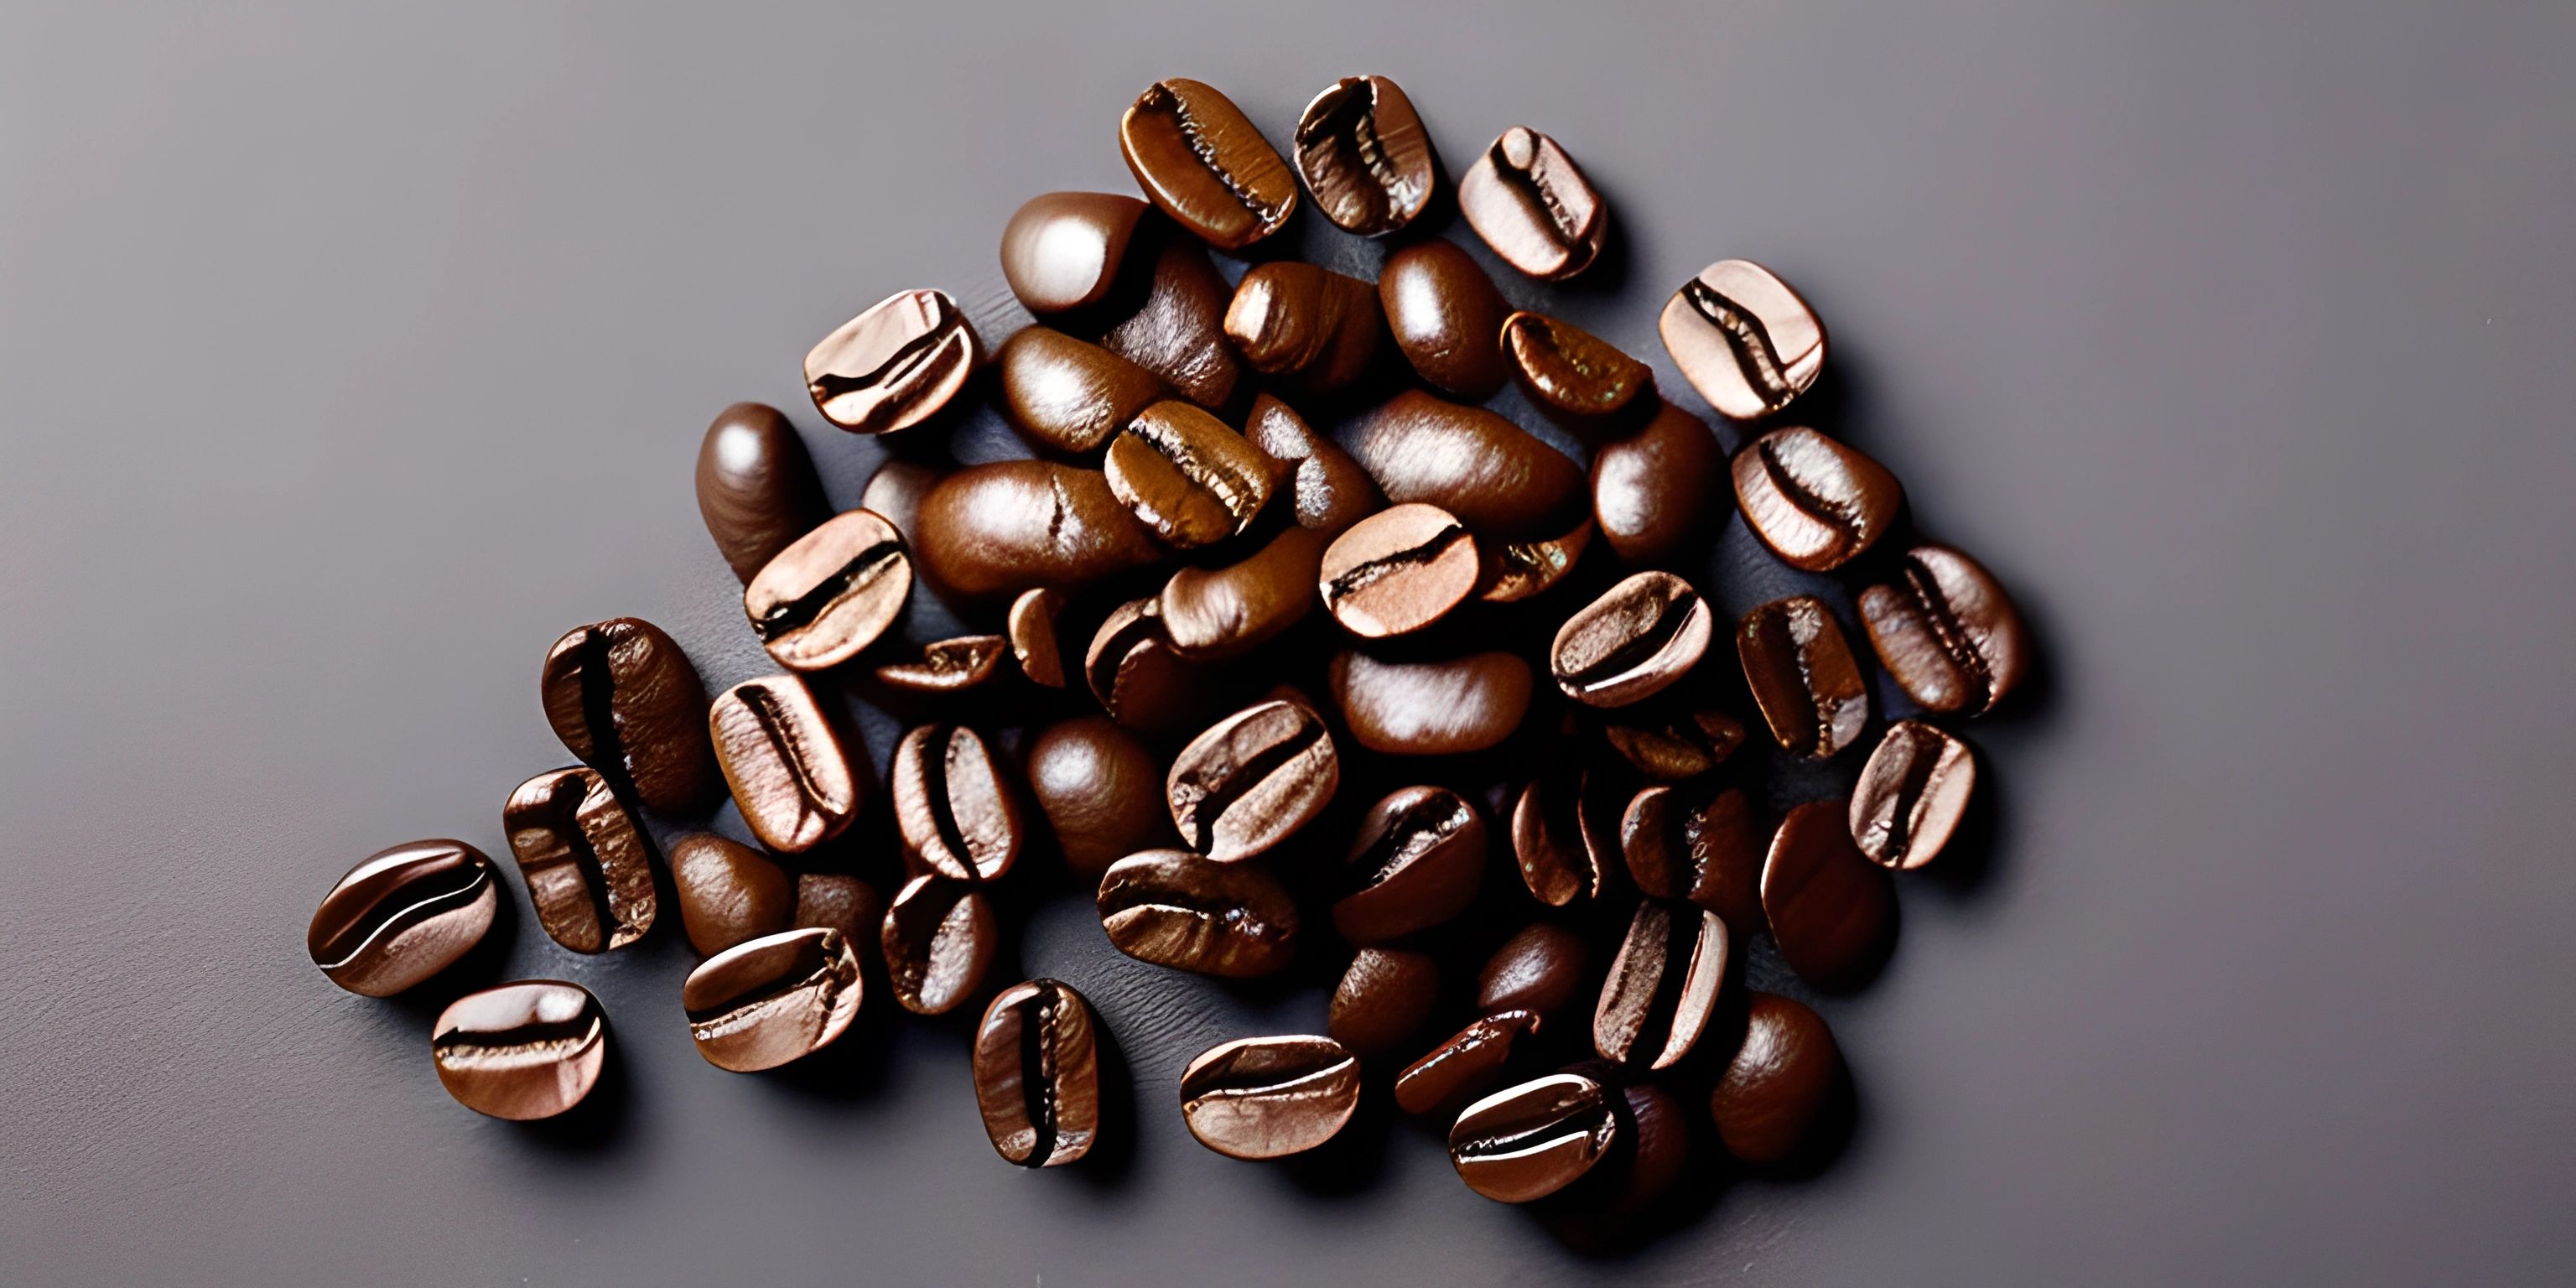 there are several coffee beans scattered close together on a gray surface, with one falling off of the edge